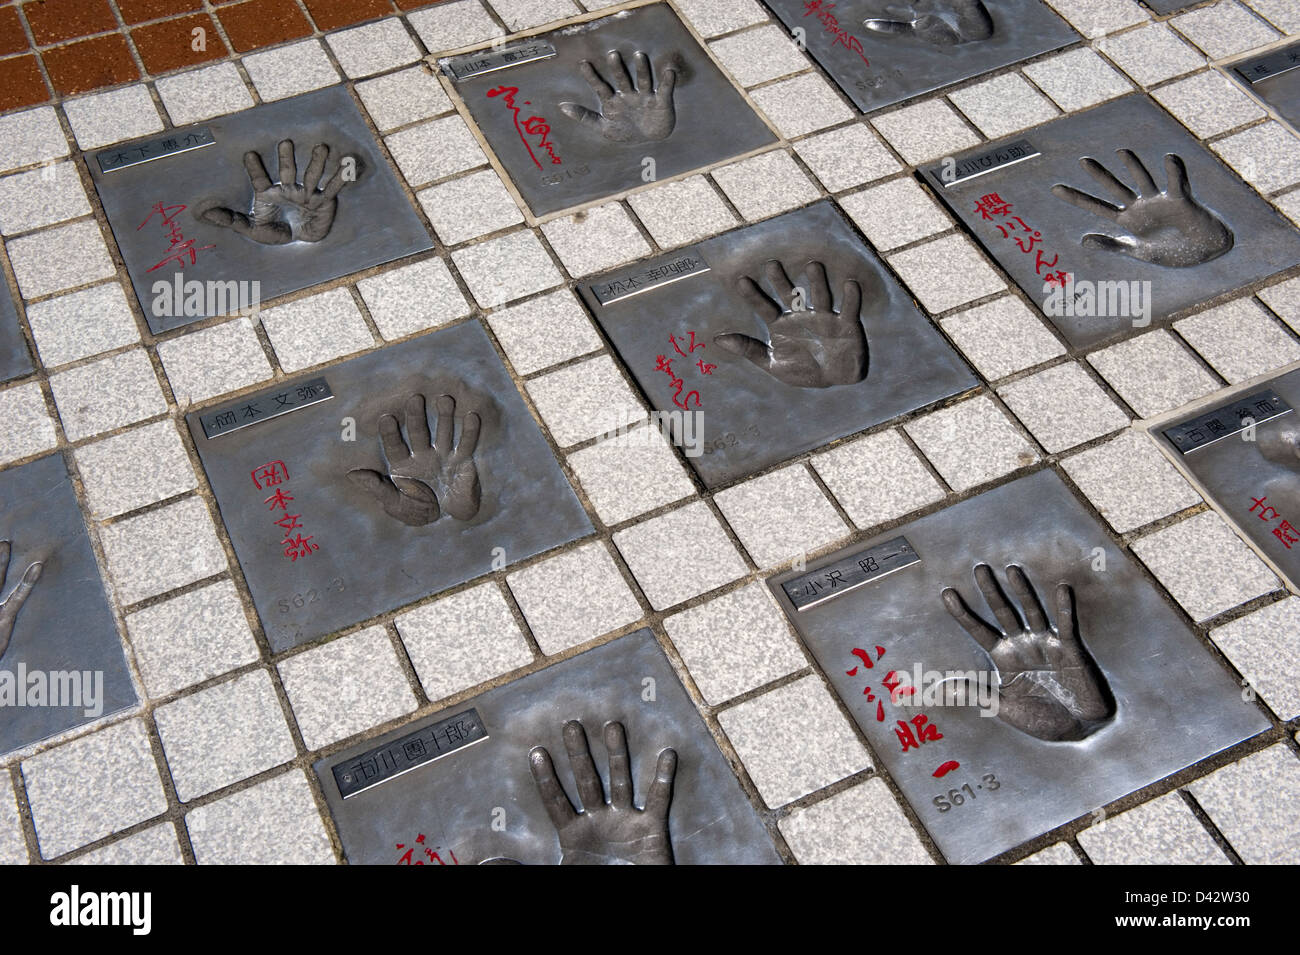 Hand prints of famous Japanese movie actors cast in concrete sidewalk outside a theater in old entertainment district of Asakusa Stock Photo